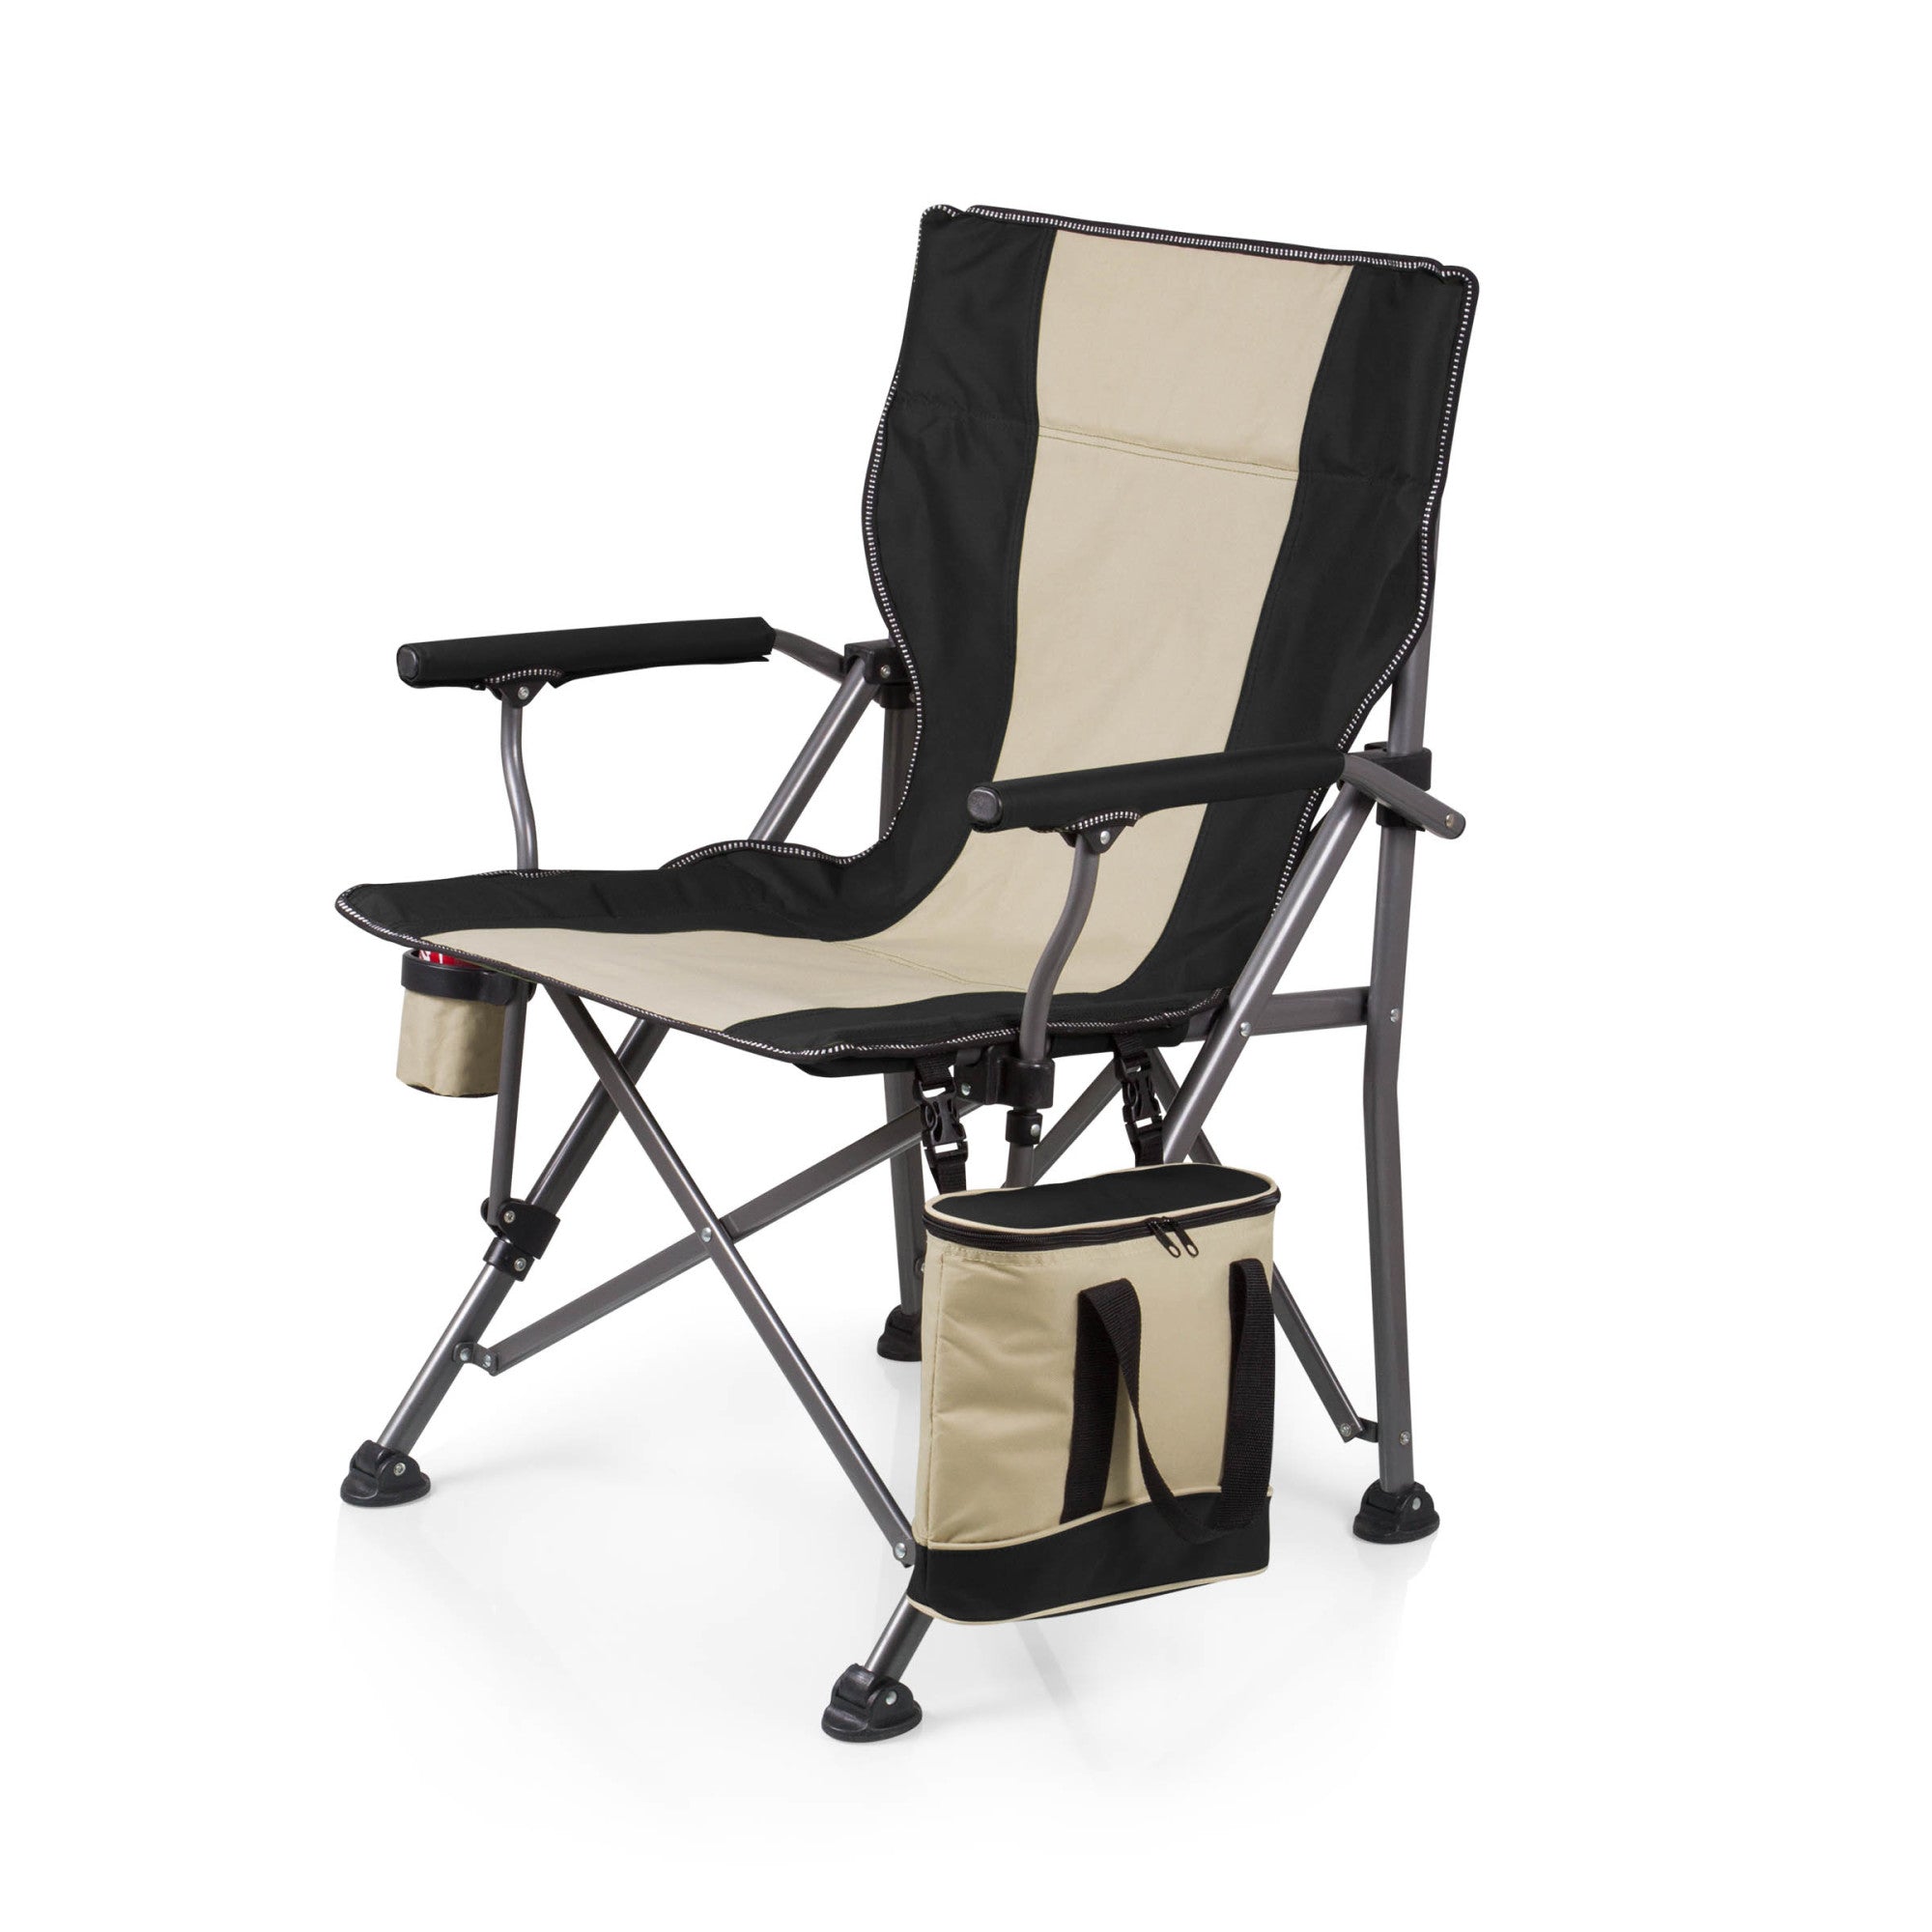 Los Angeles Chargers - Outlander XL Camping Chair with Cooler